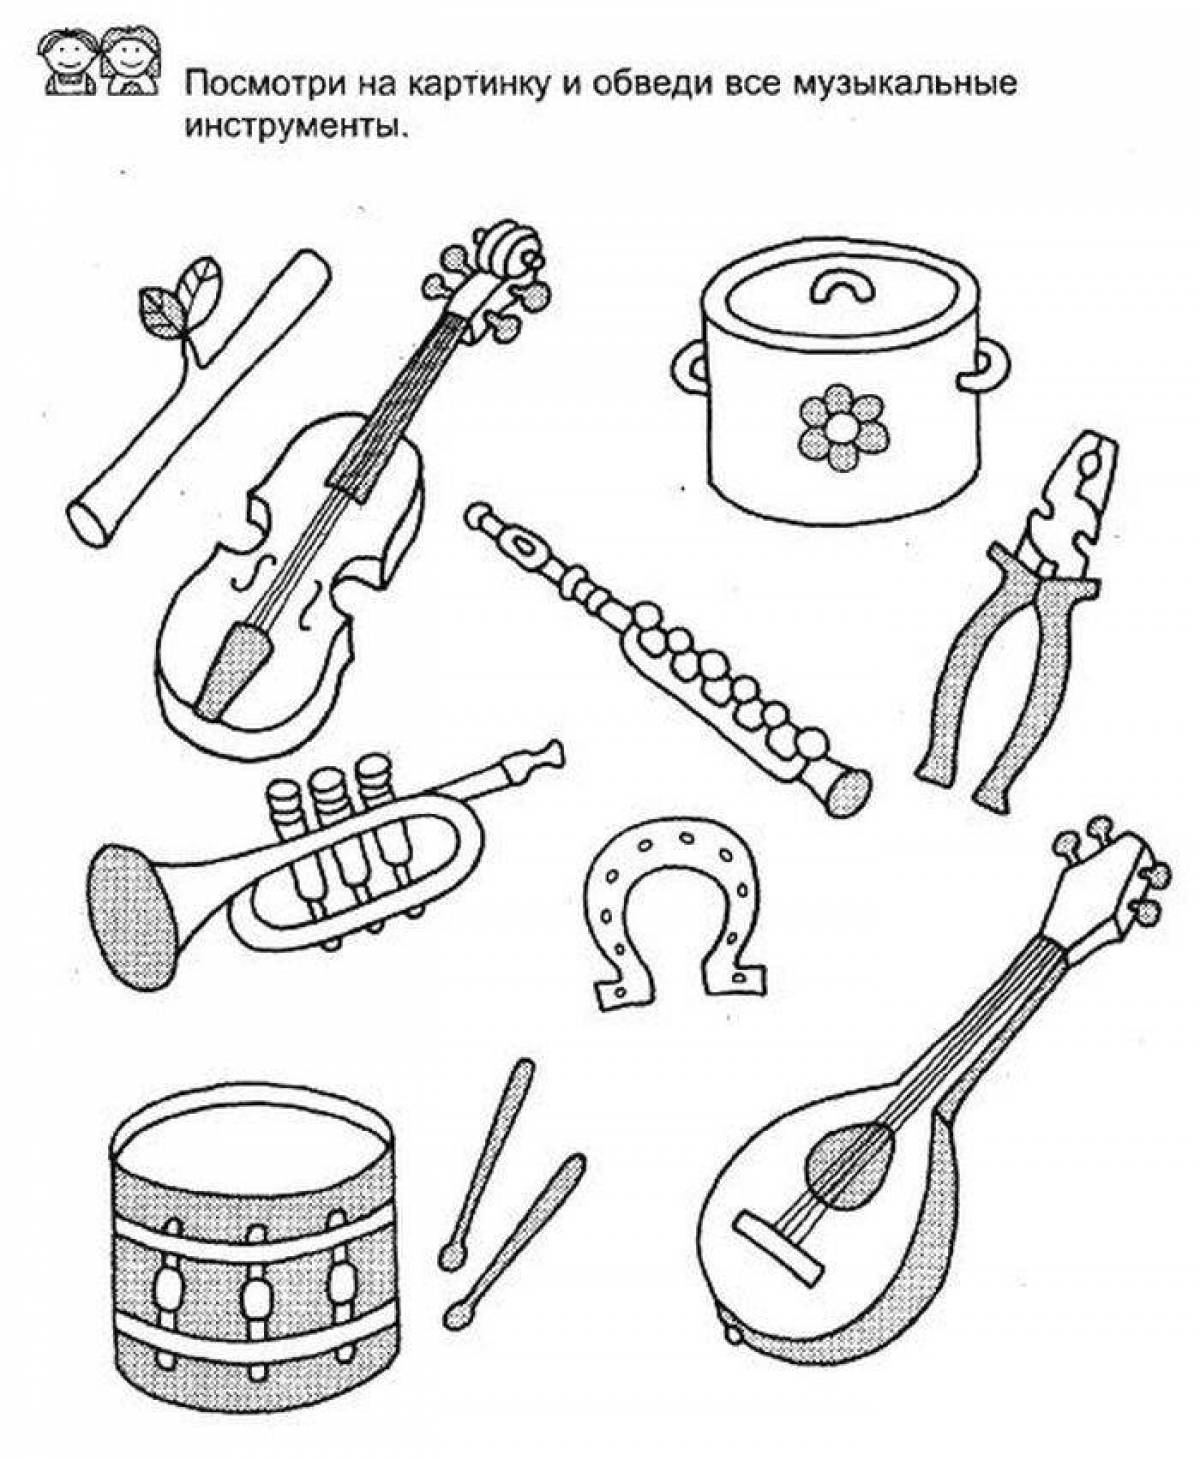 Playful coloring of musical instruments